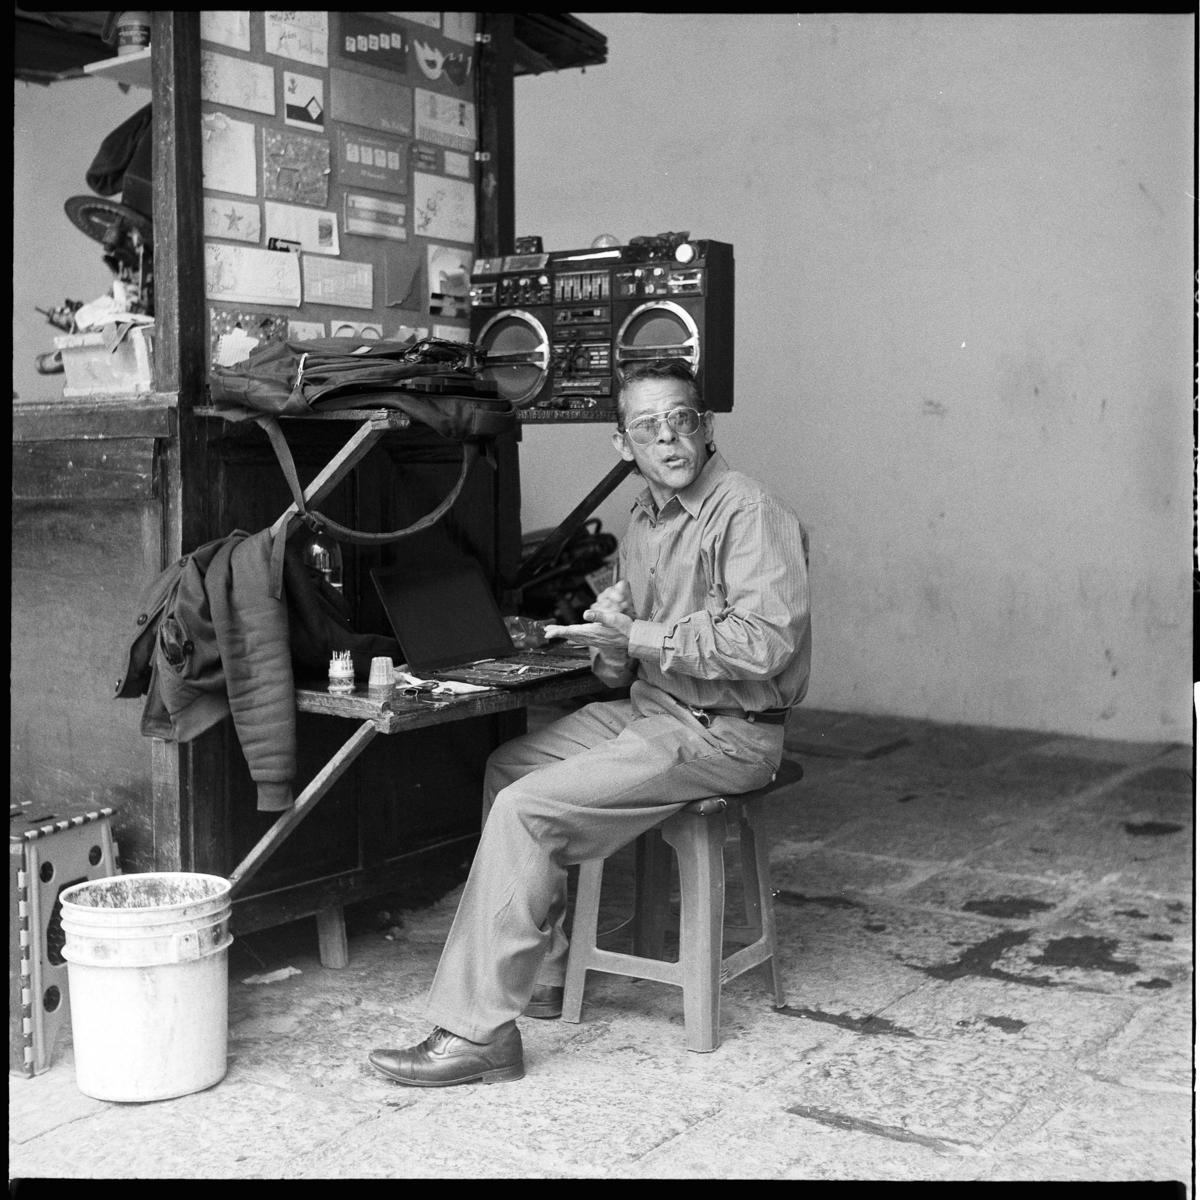 analog black-and-white street photograph of a man sitting at his street stand. He is a printer by a church in Mexico City's historic center, and there is an old boombox by his side.